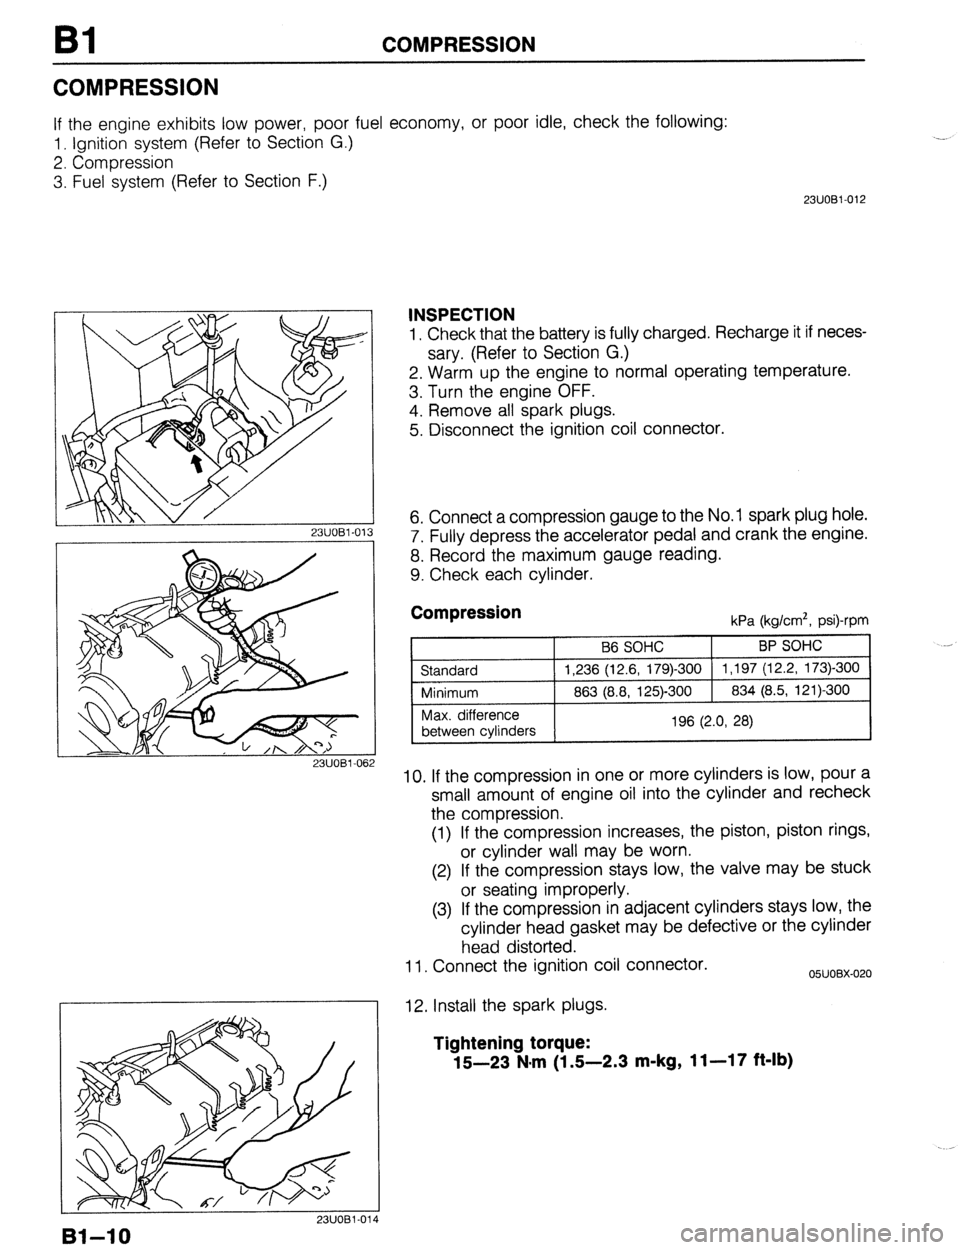 MAZDA 323 1989  Factory Repair Manual Bl COMPRESSION 
COMPRESSION 
If the engine exhibits low power, poor fuel economy, or poor idle, check the following: 
1. Ignition system (Refer to Section G.) 
2. Compression 
3. Fuel system (Refer to